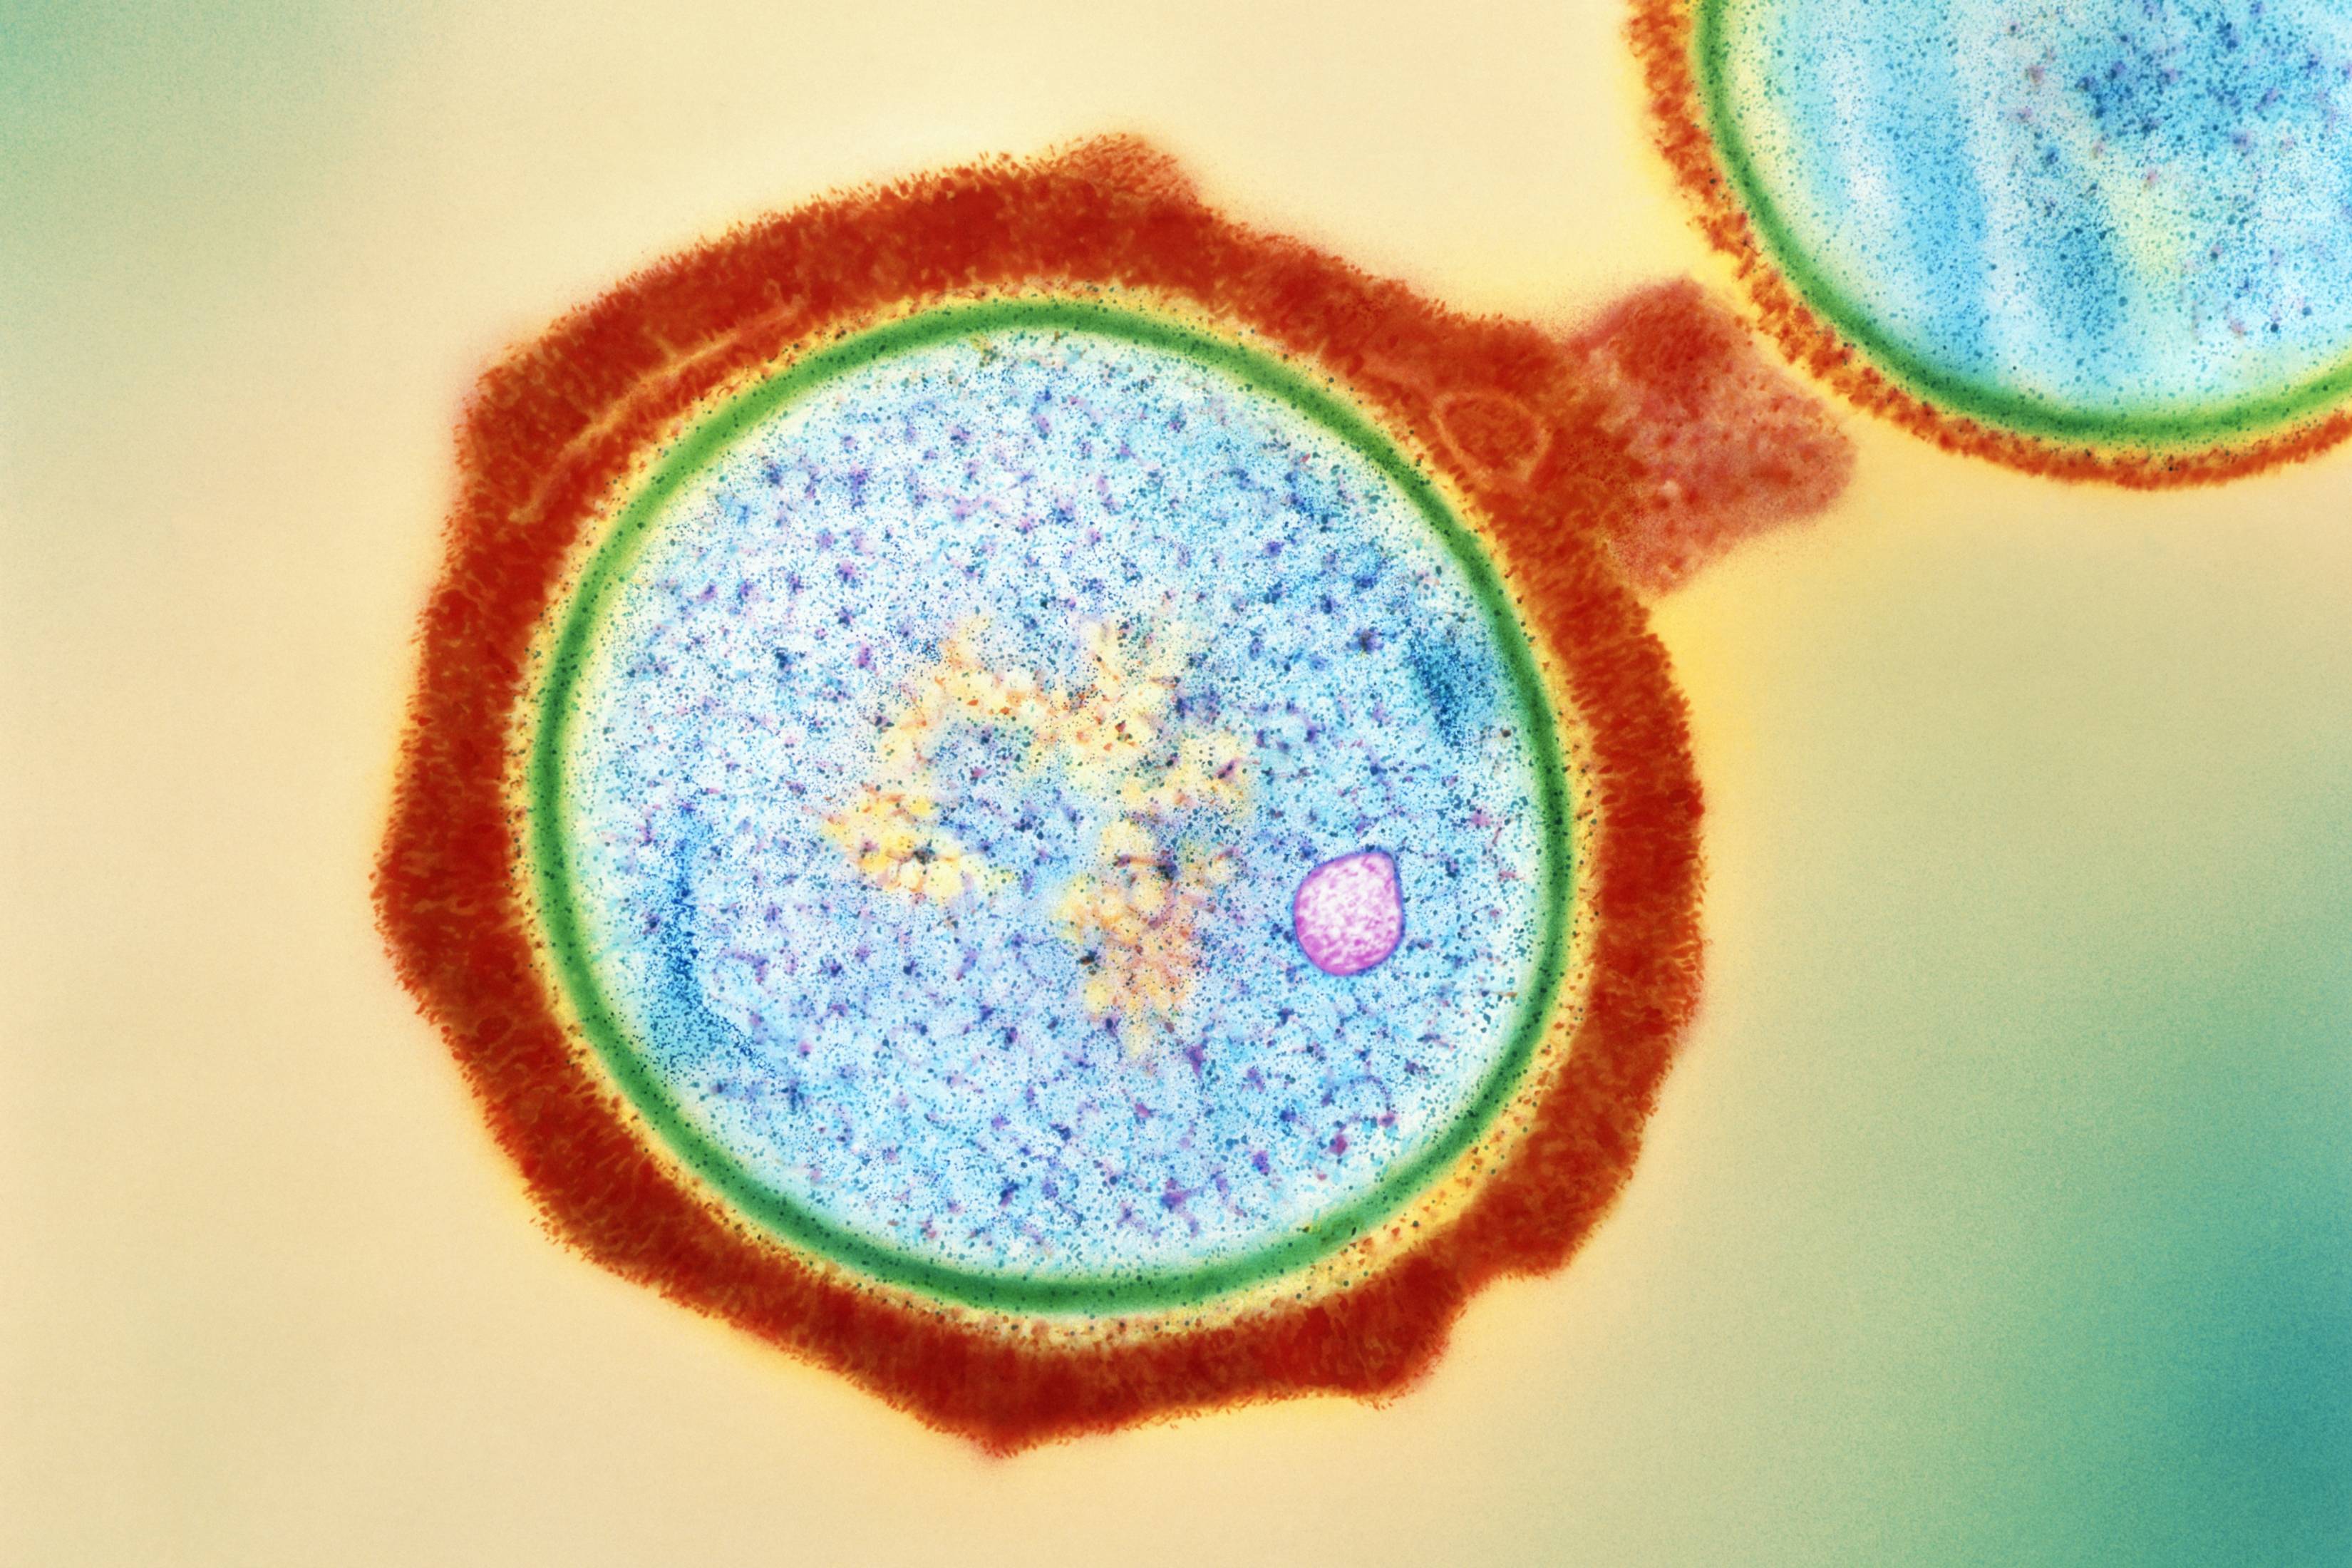 Infections caused by methicillin-resistant Staphylococcus aureus (pictured), can lead to serious health complications. Lysins help fight such infections by destroying the bacterium’s cell wall (green), thereby killing the microbe.